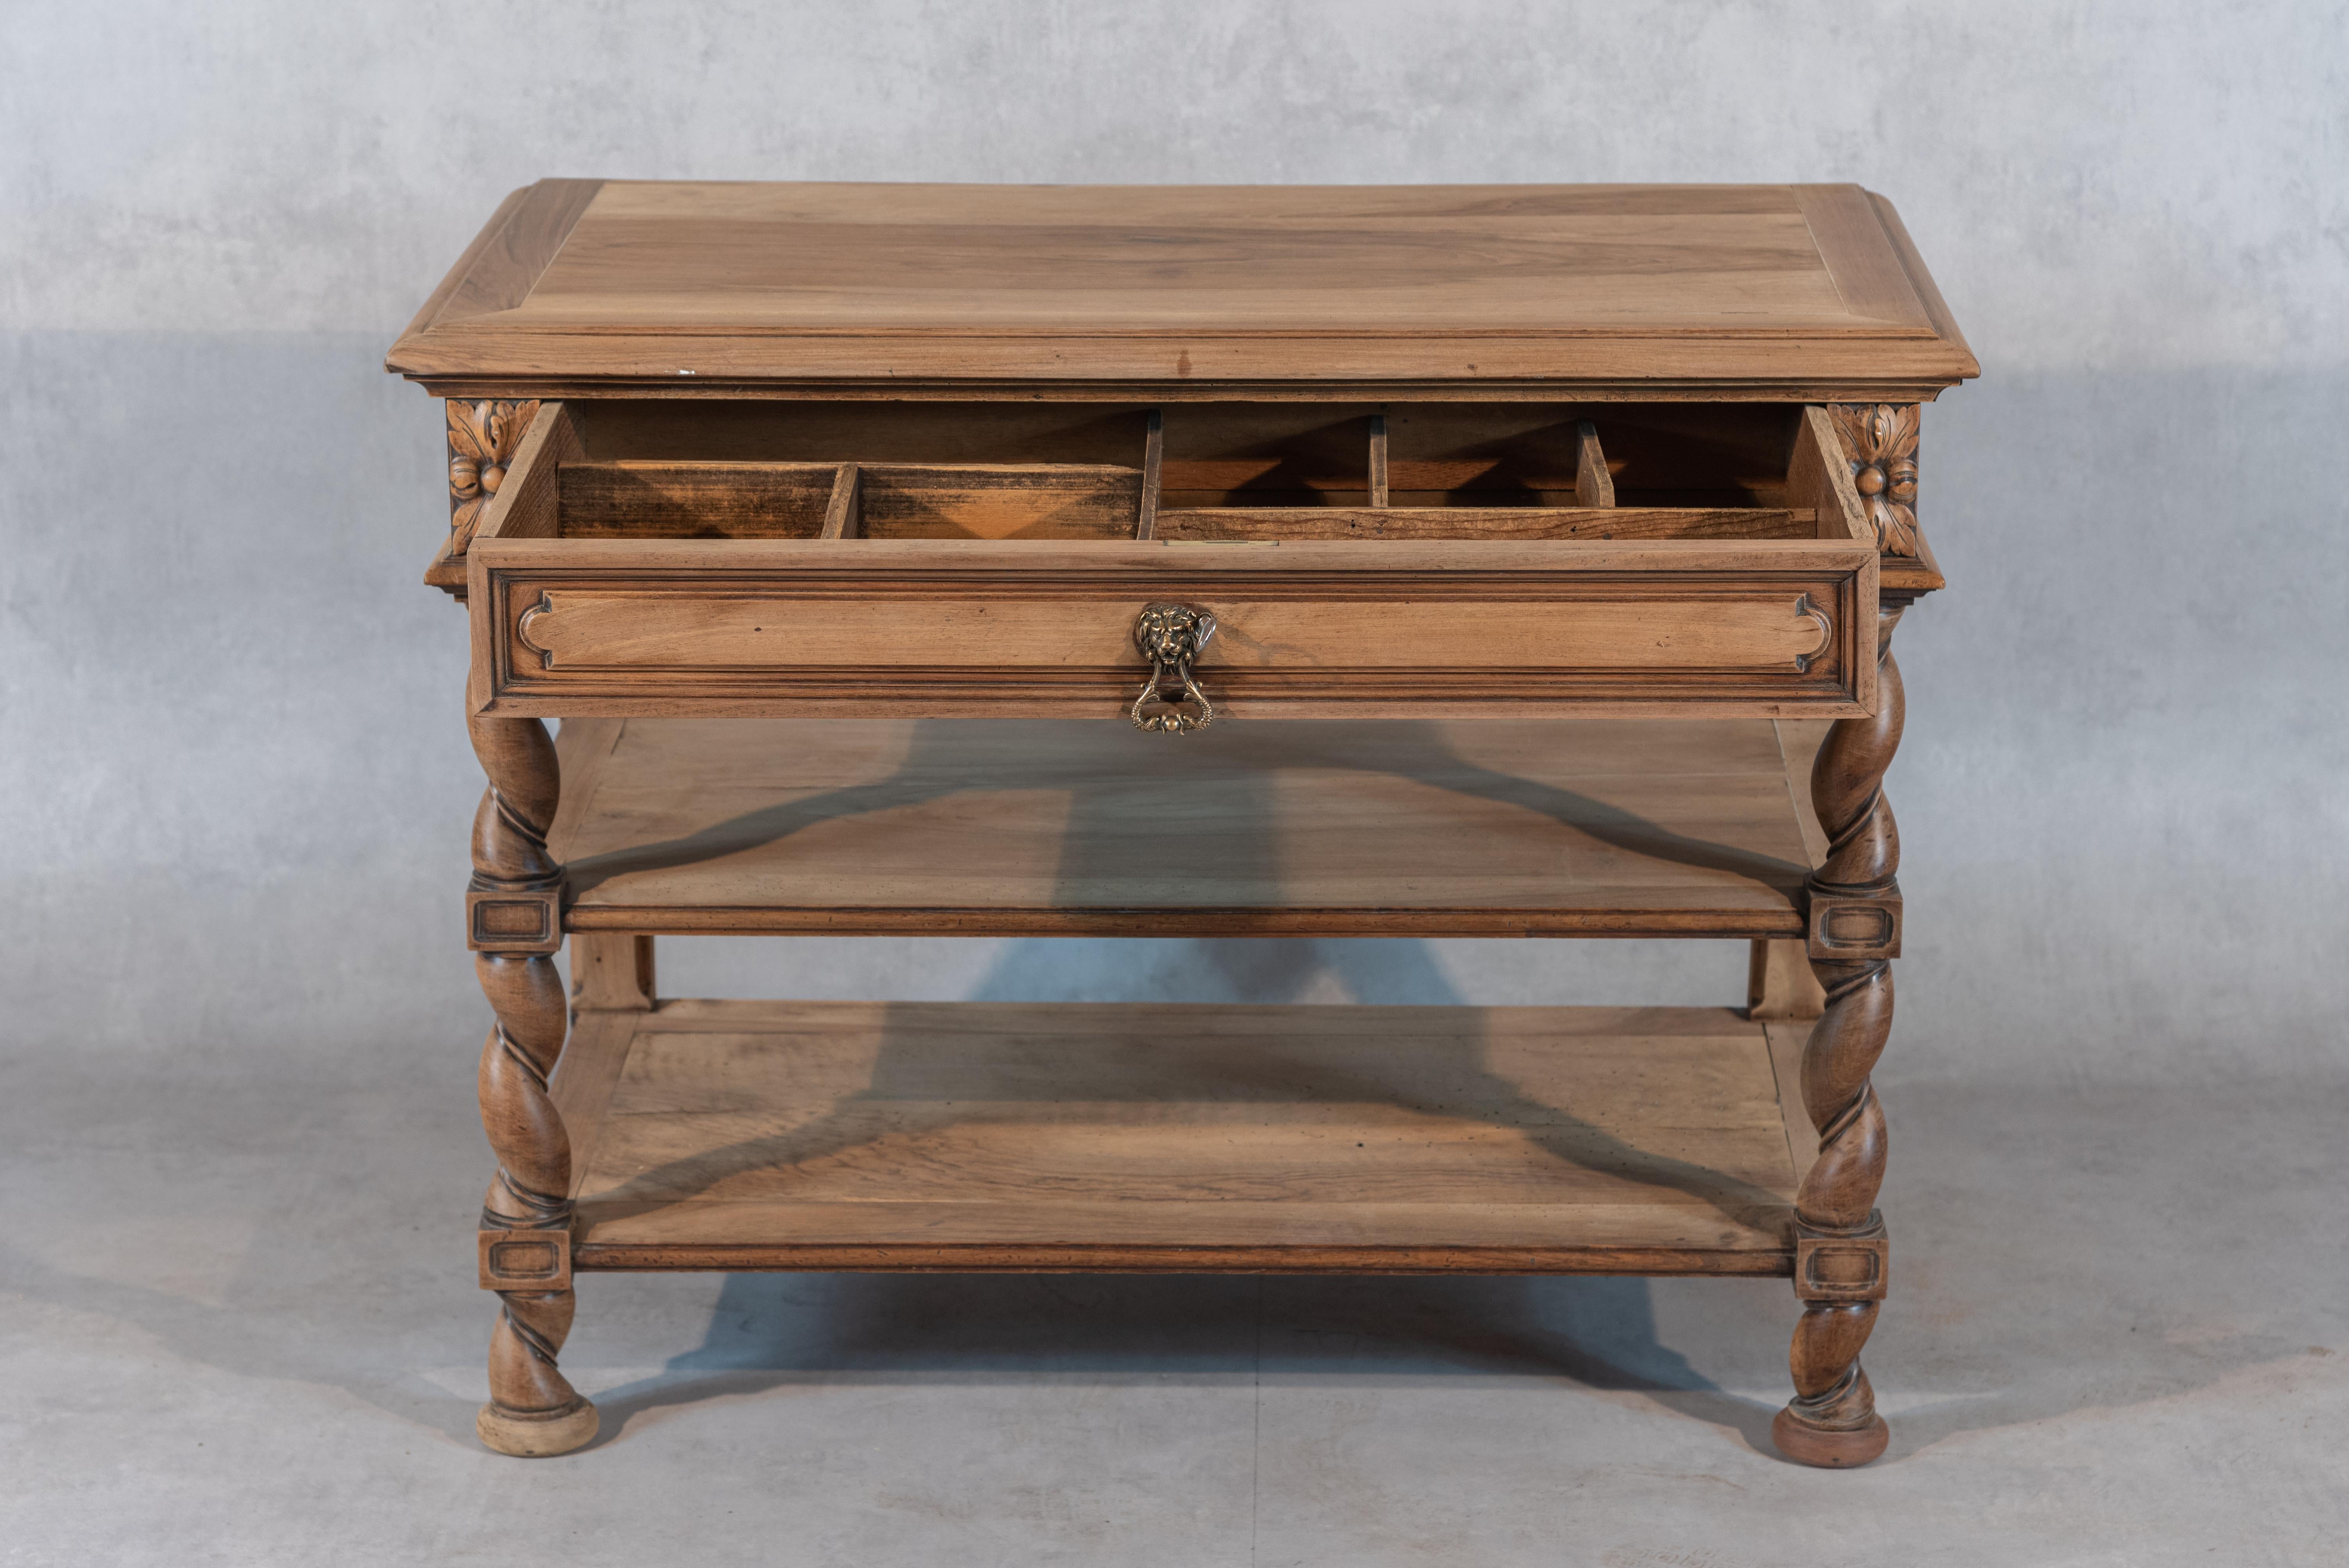 This French 19th century Henri II bleached Desserte is made of walnut and features impressive curled columns on the sides. With a drawer and two shelves, this desserte offers both practicality and a unique style that will truly add charm and